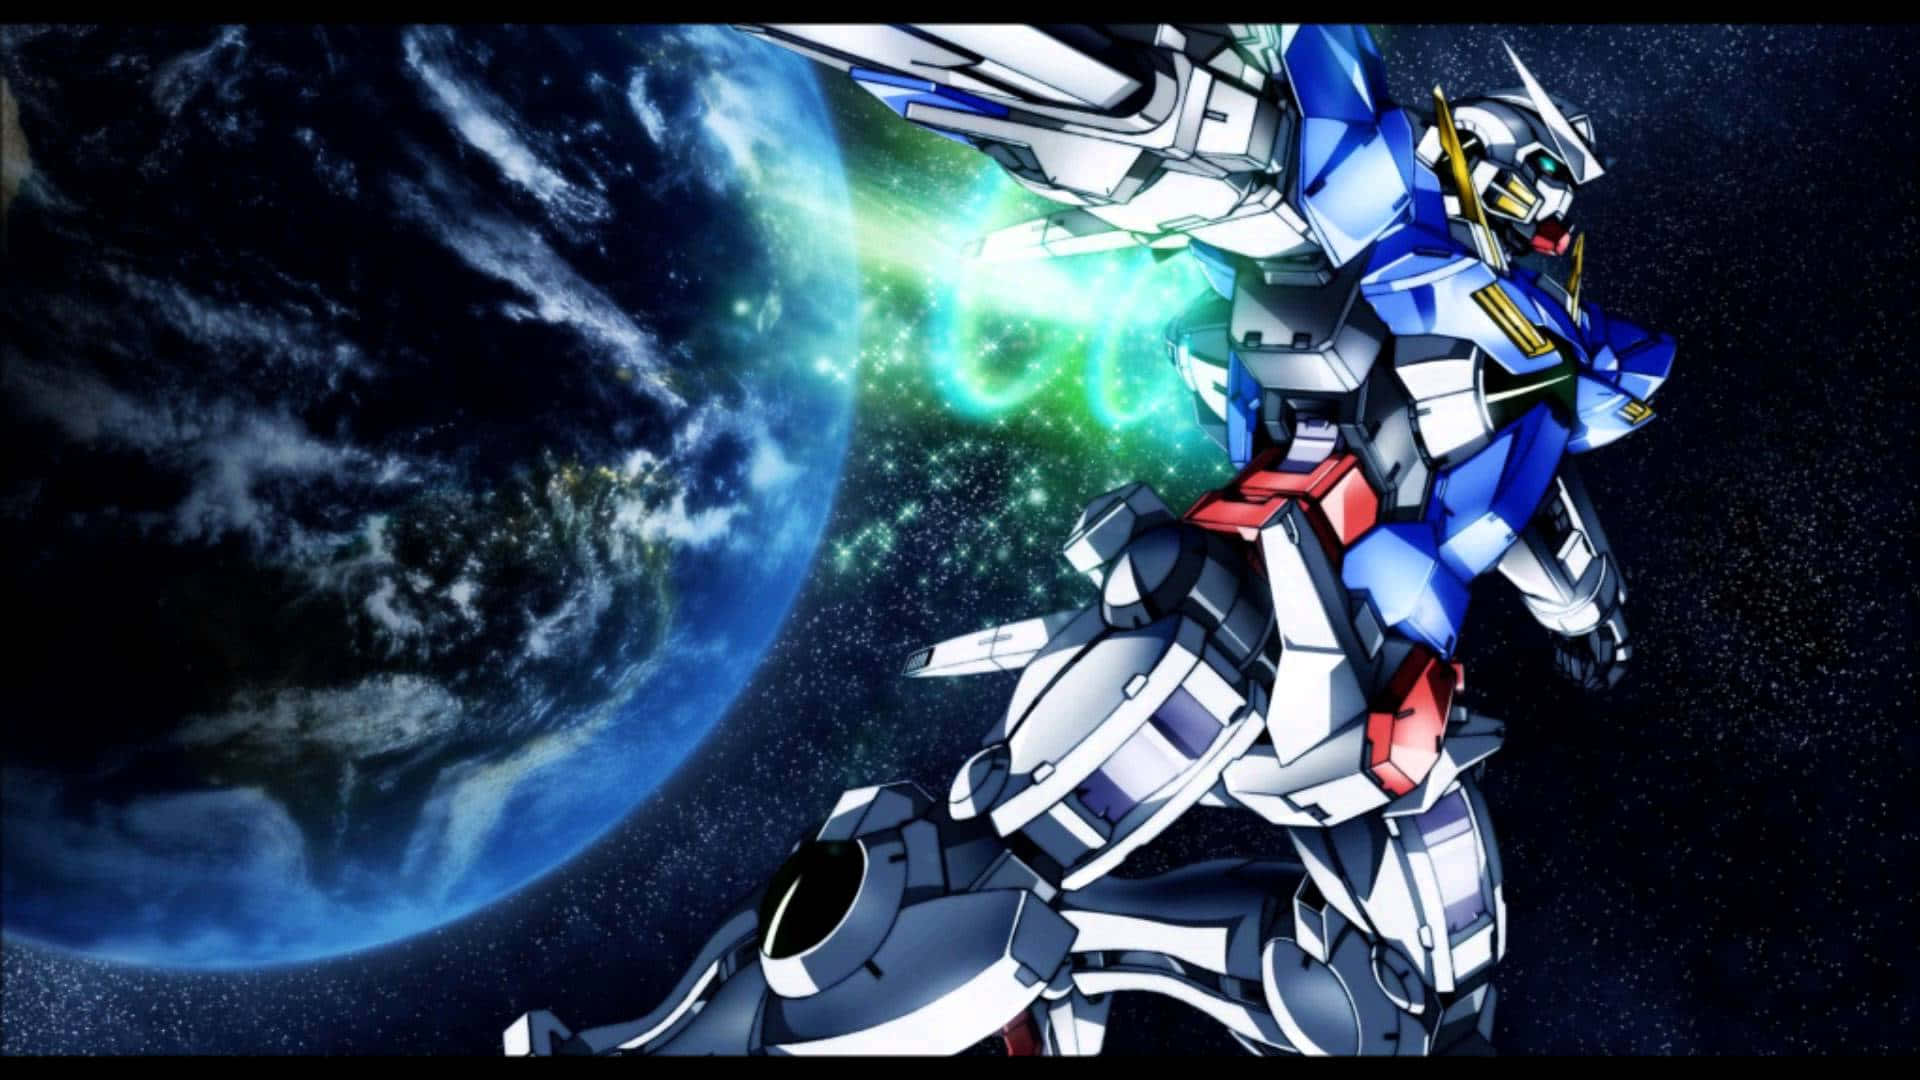 Get ready to conquer the universe with the power of Gundam